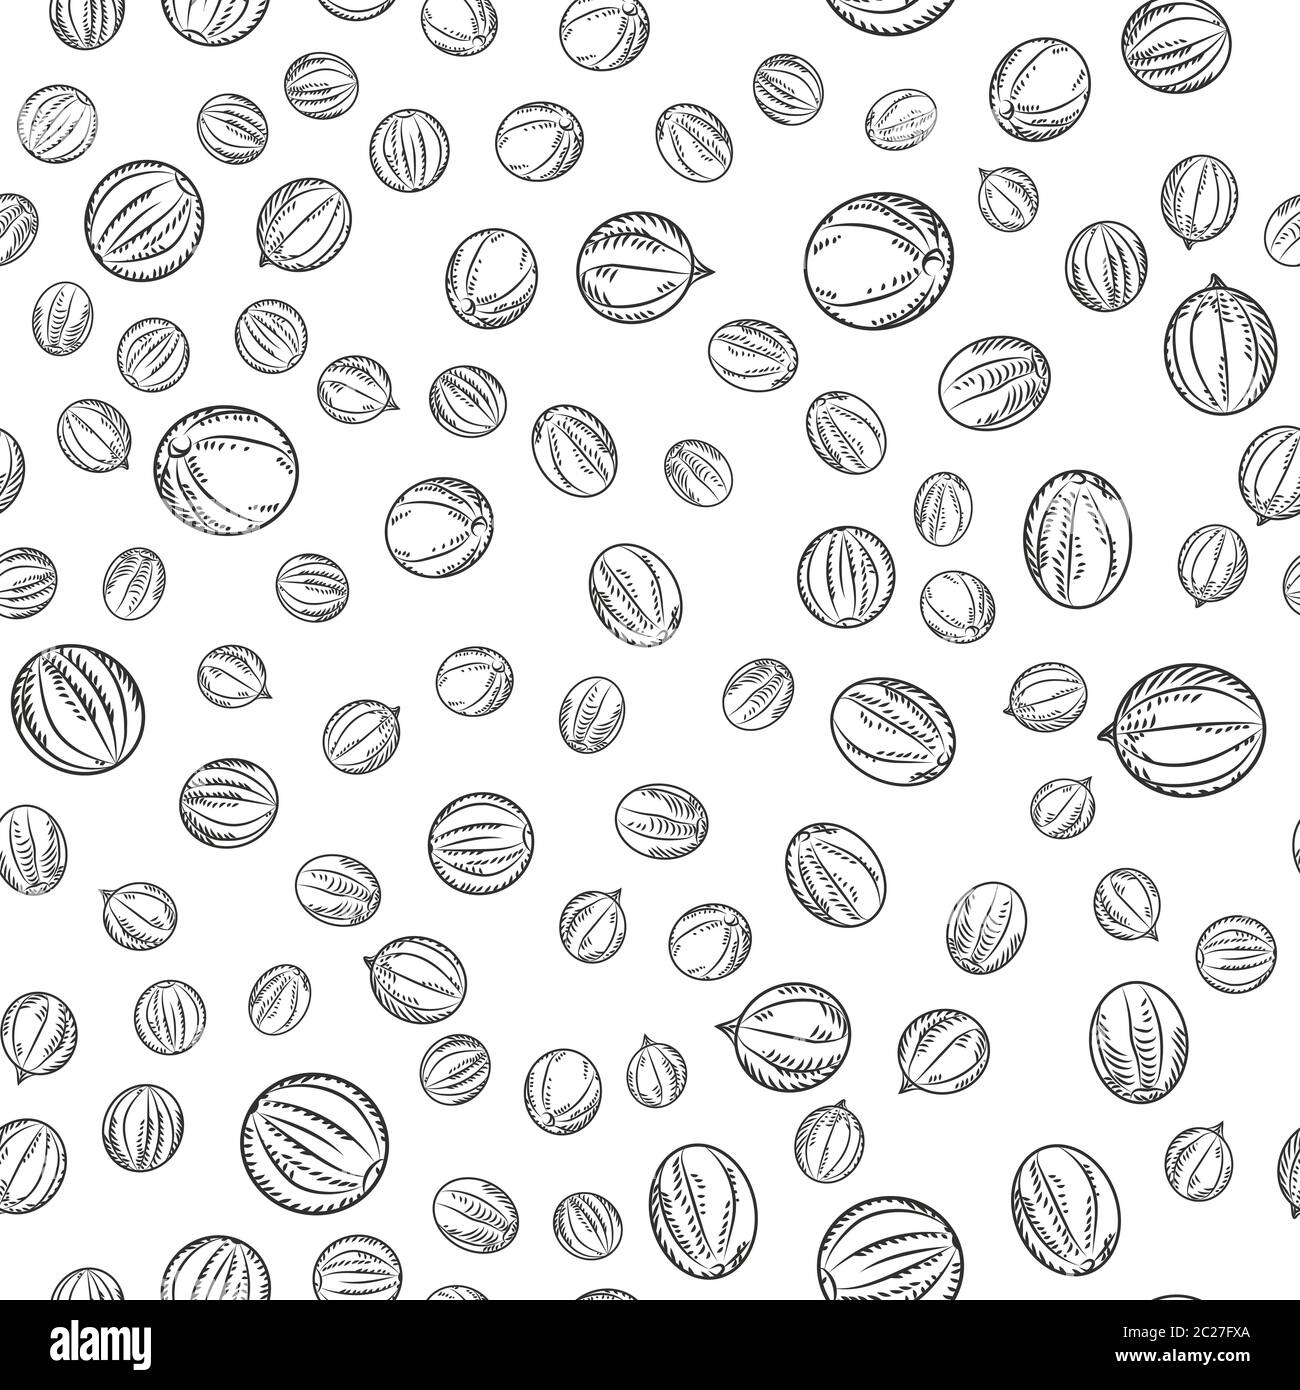 Black pepper seamless pattern on white background. Cooking ingredients wallpaper. Natural vegetable. Monochrome engraving vintage style. Vector illust Stock Vector